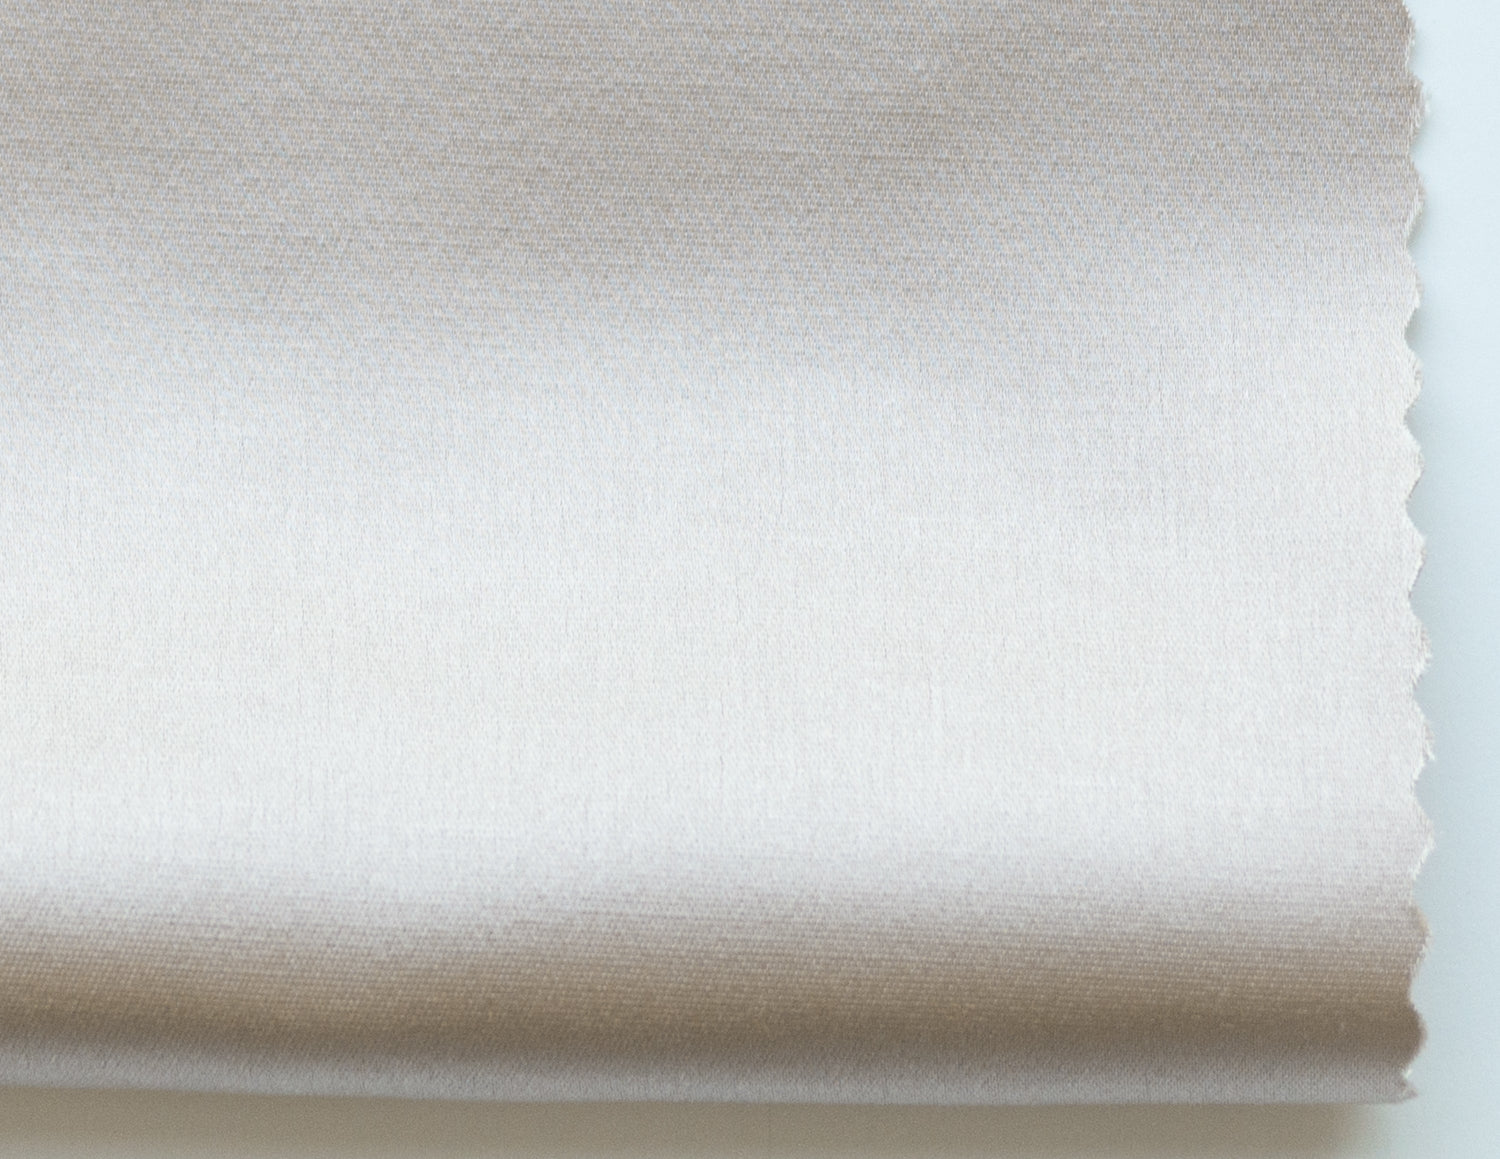 LUSTER - Satin semi sheer - ChampagneLuster collection, featuring satin finish semi-sheer fabric, comes in a variety of colors. The luminous sheen and the warm tone champagne shade makes a perfect silkyDecorPassionsLUSTER - Satin semi sheer - Champagne